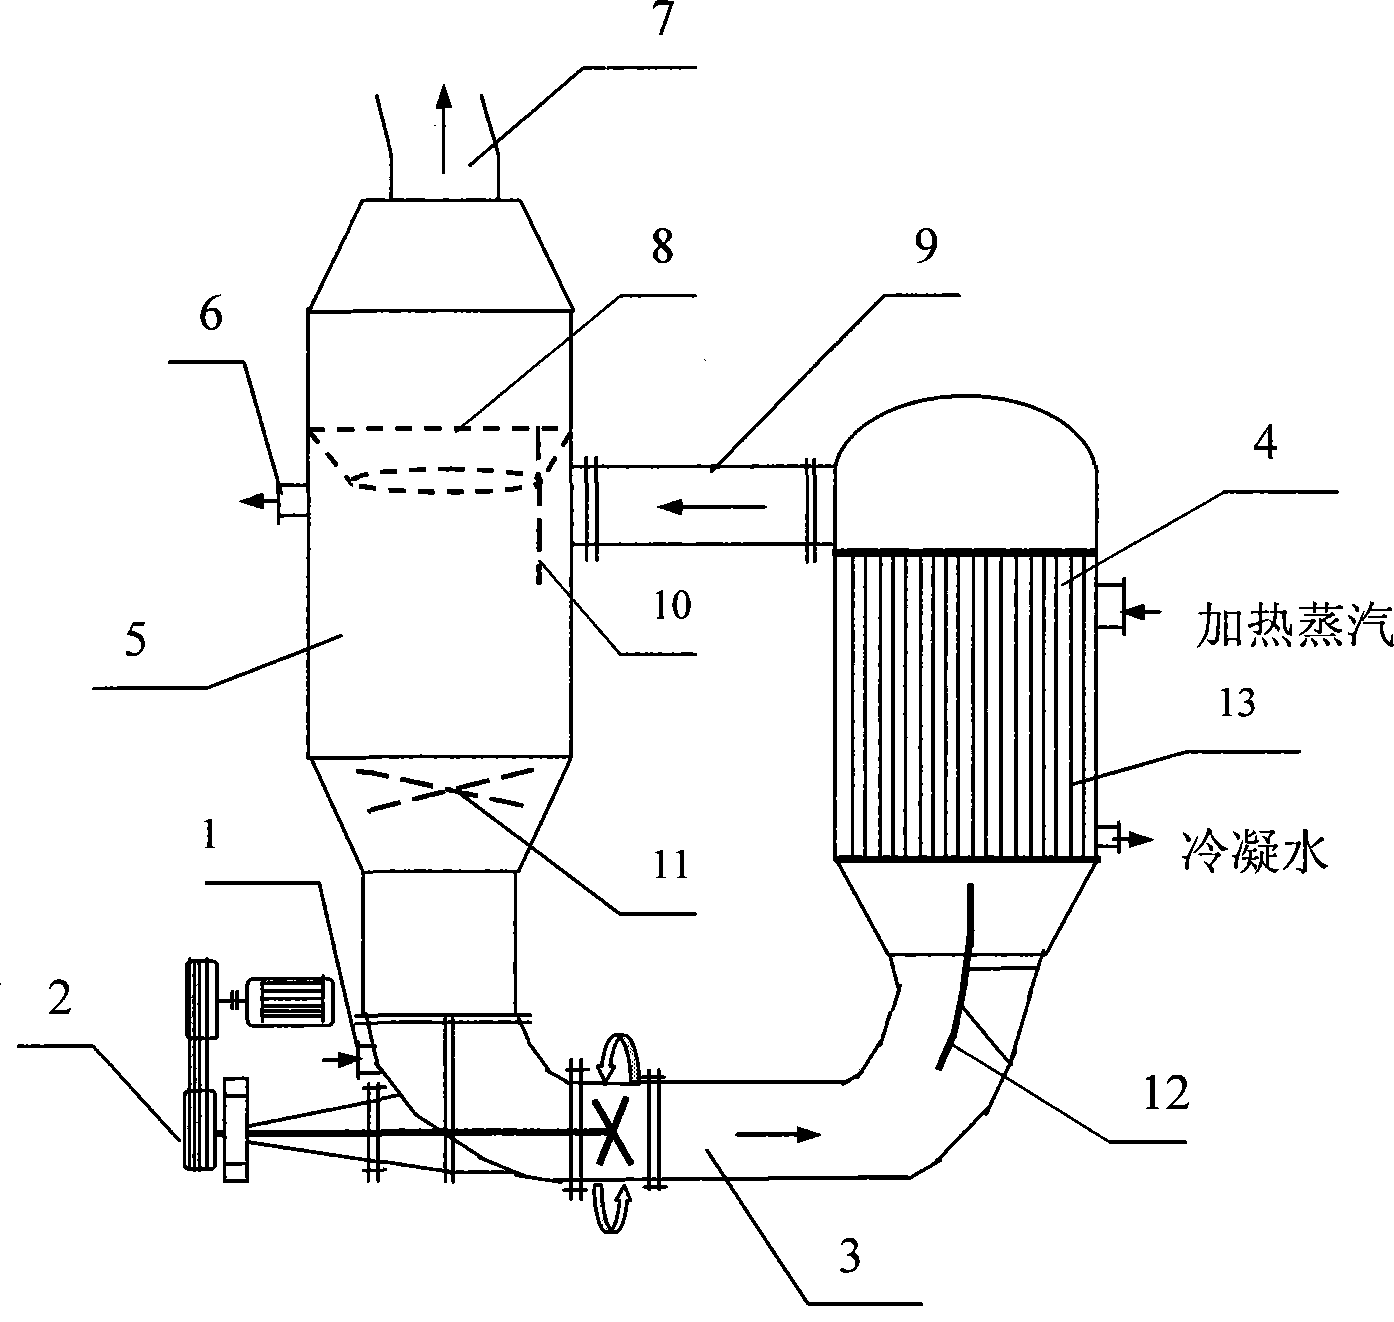 Full forced circulation type evaporator